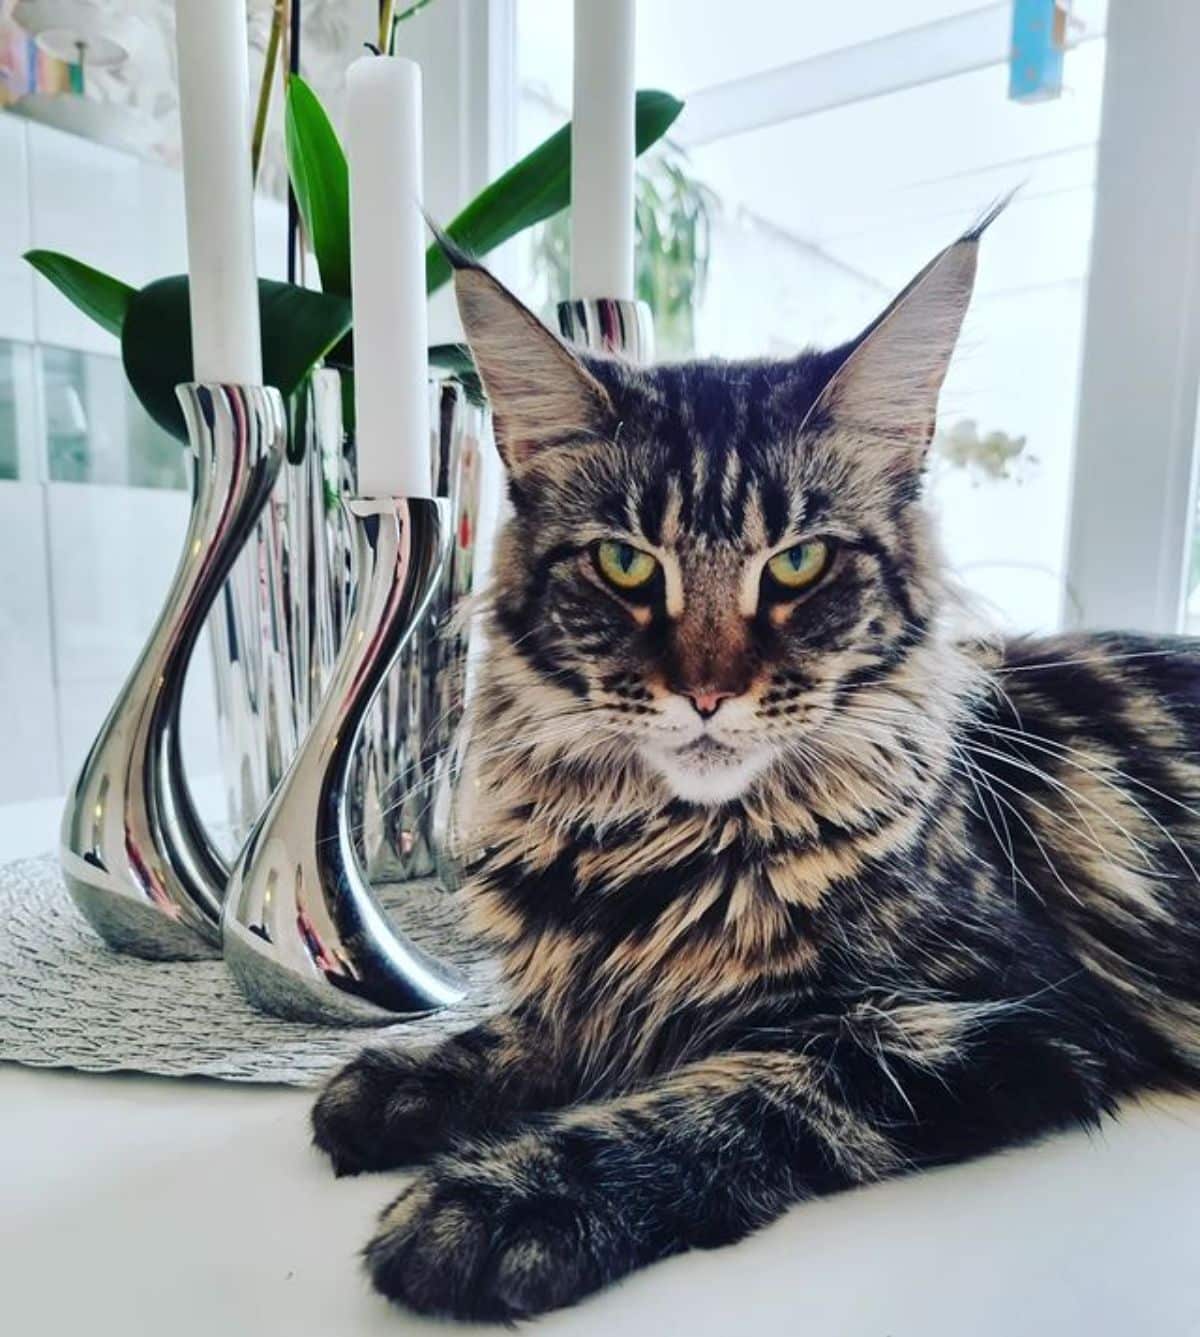 A mean-looking tabby maine coon lying on a table.